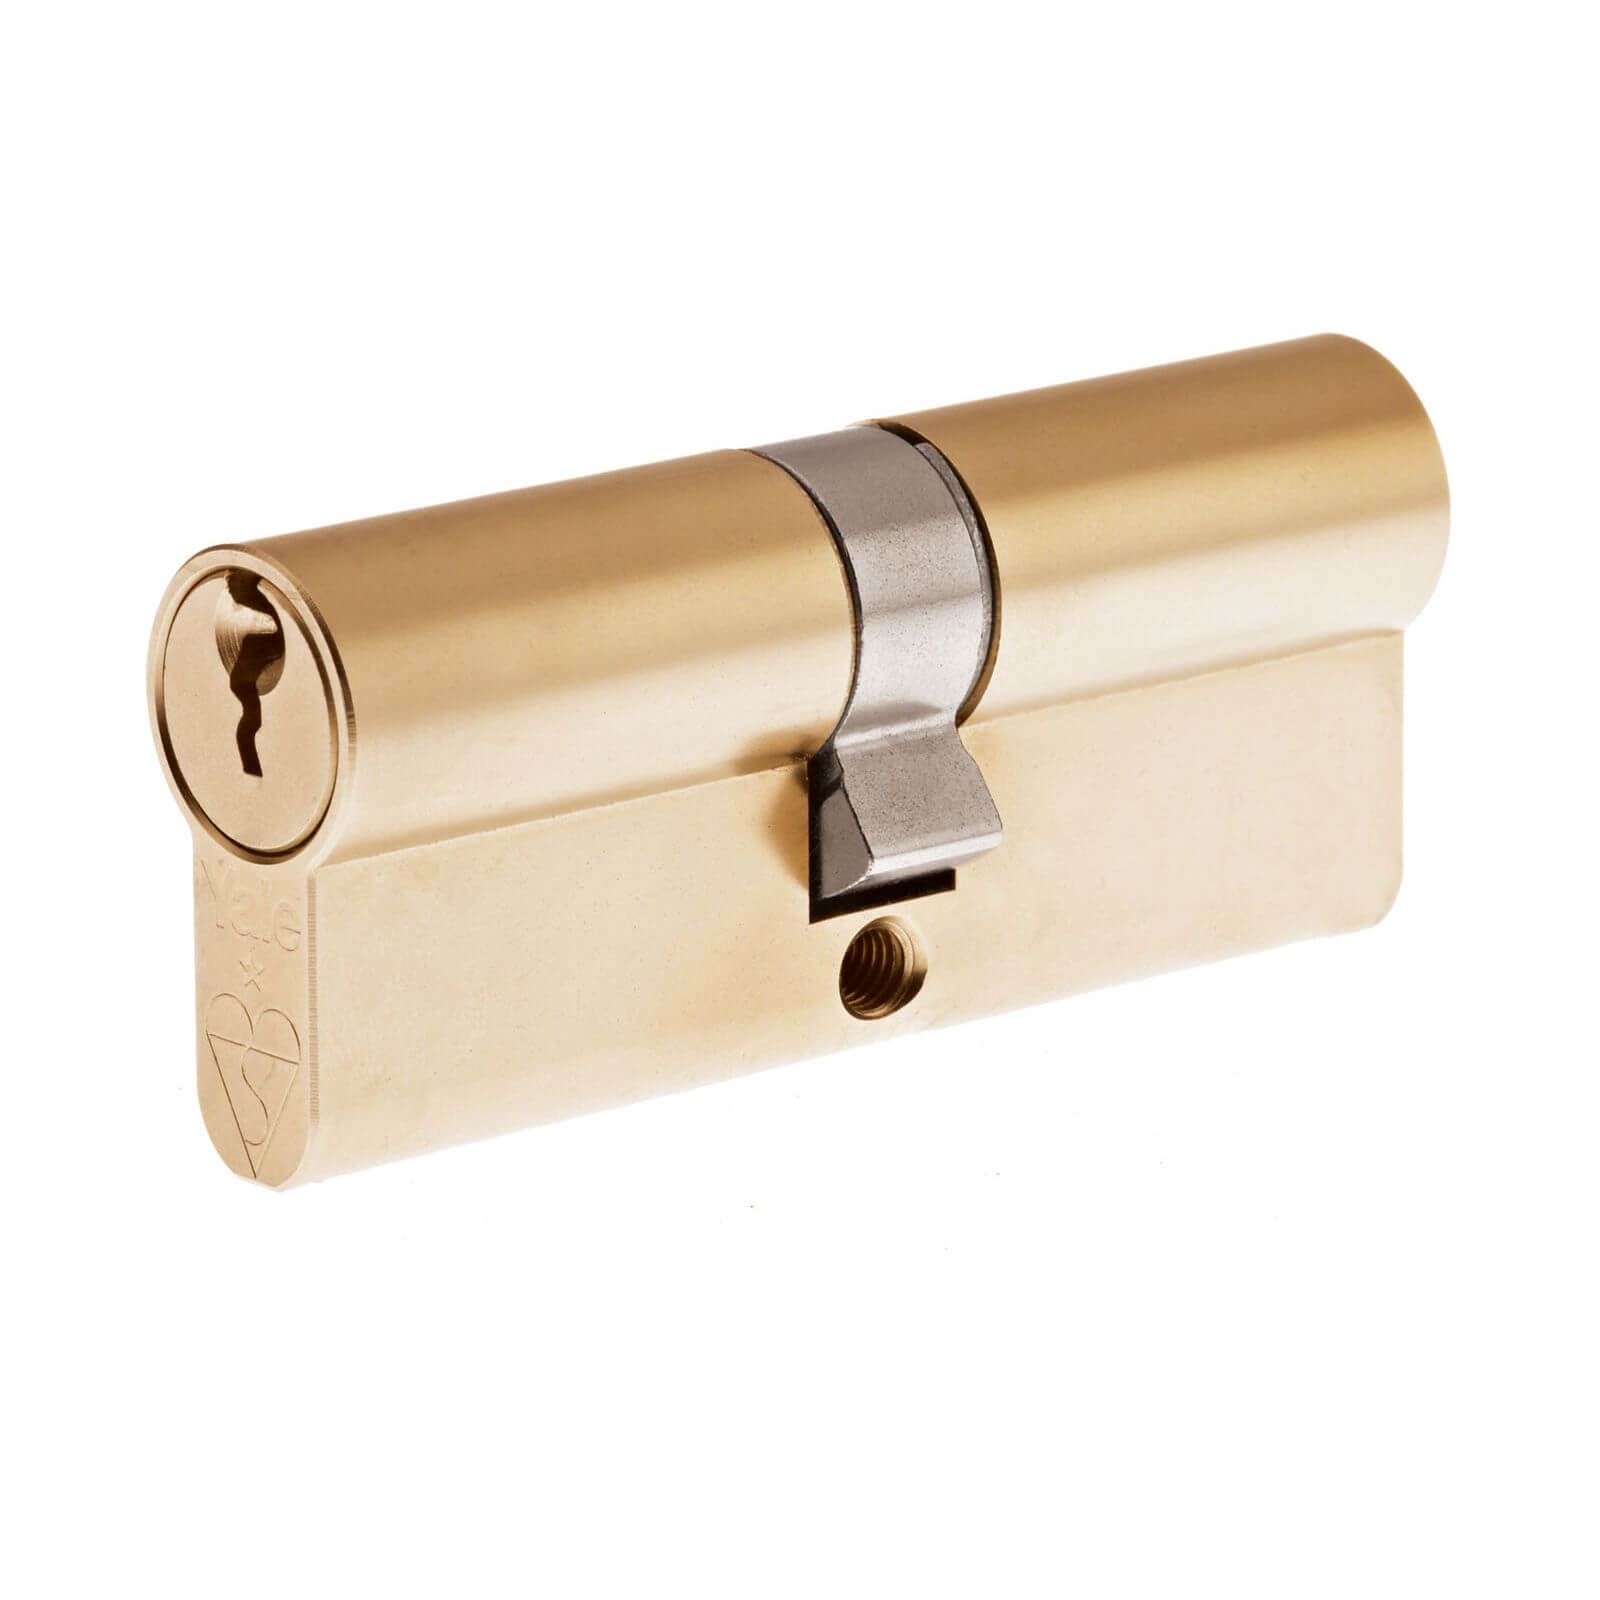 Yale Kitemarked Euro Double Cylinder - 40:10:50 (100mm) - Polsihed Brass